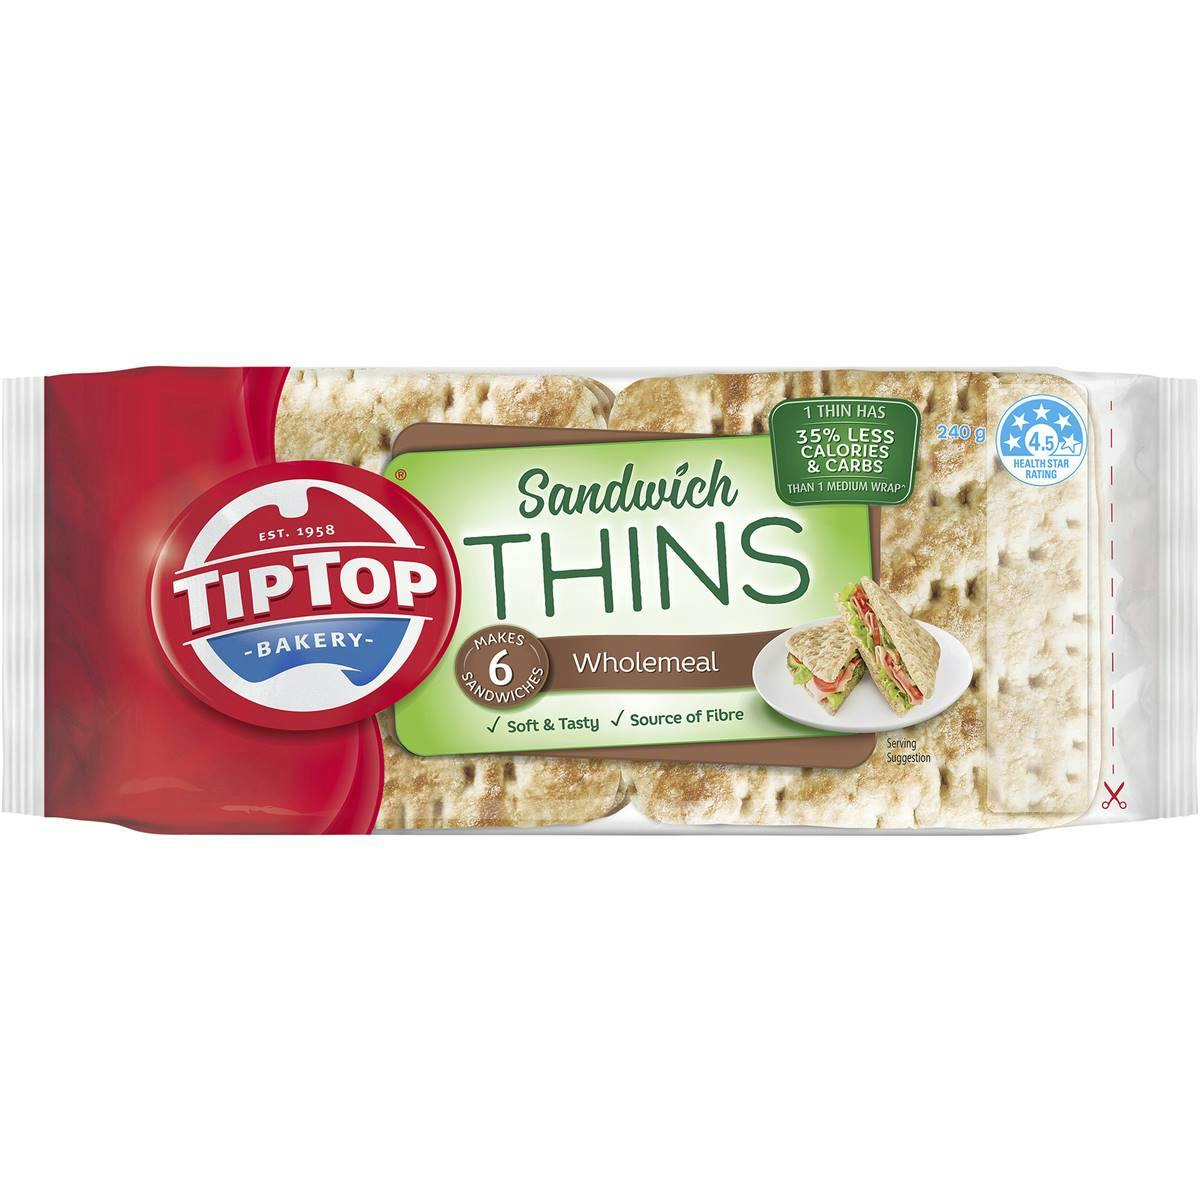 Tip Top Sandwich Thins Wholemeal Bread 6 Pack